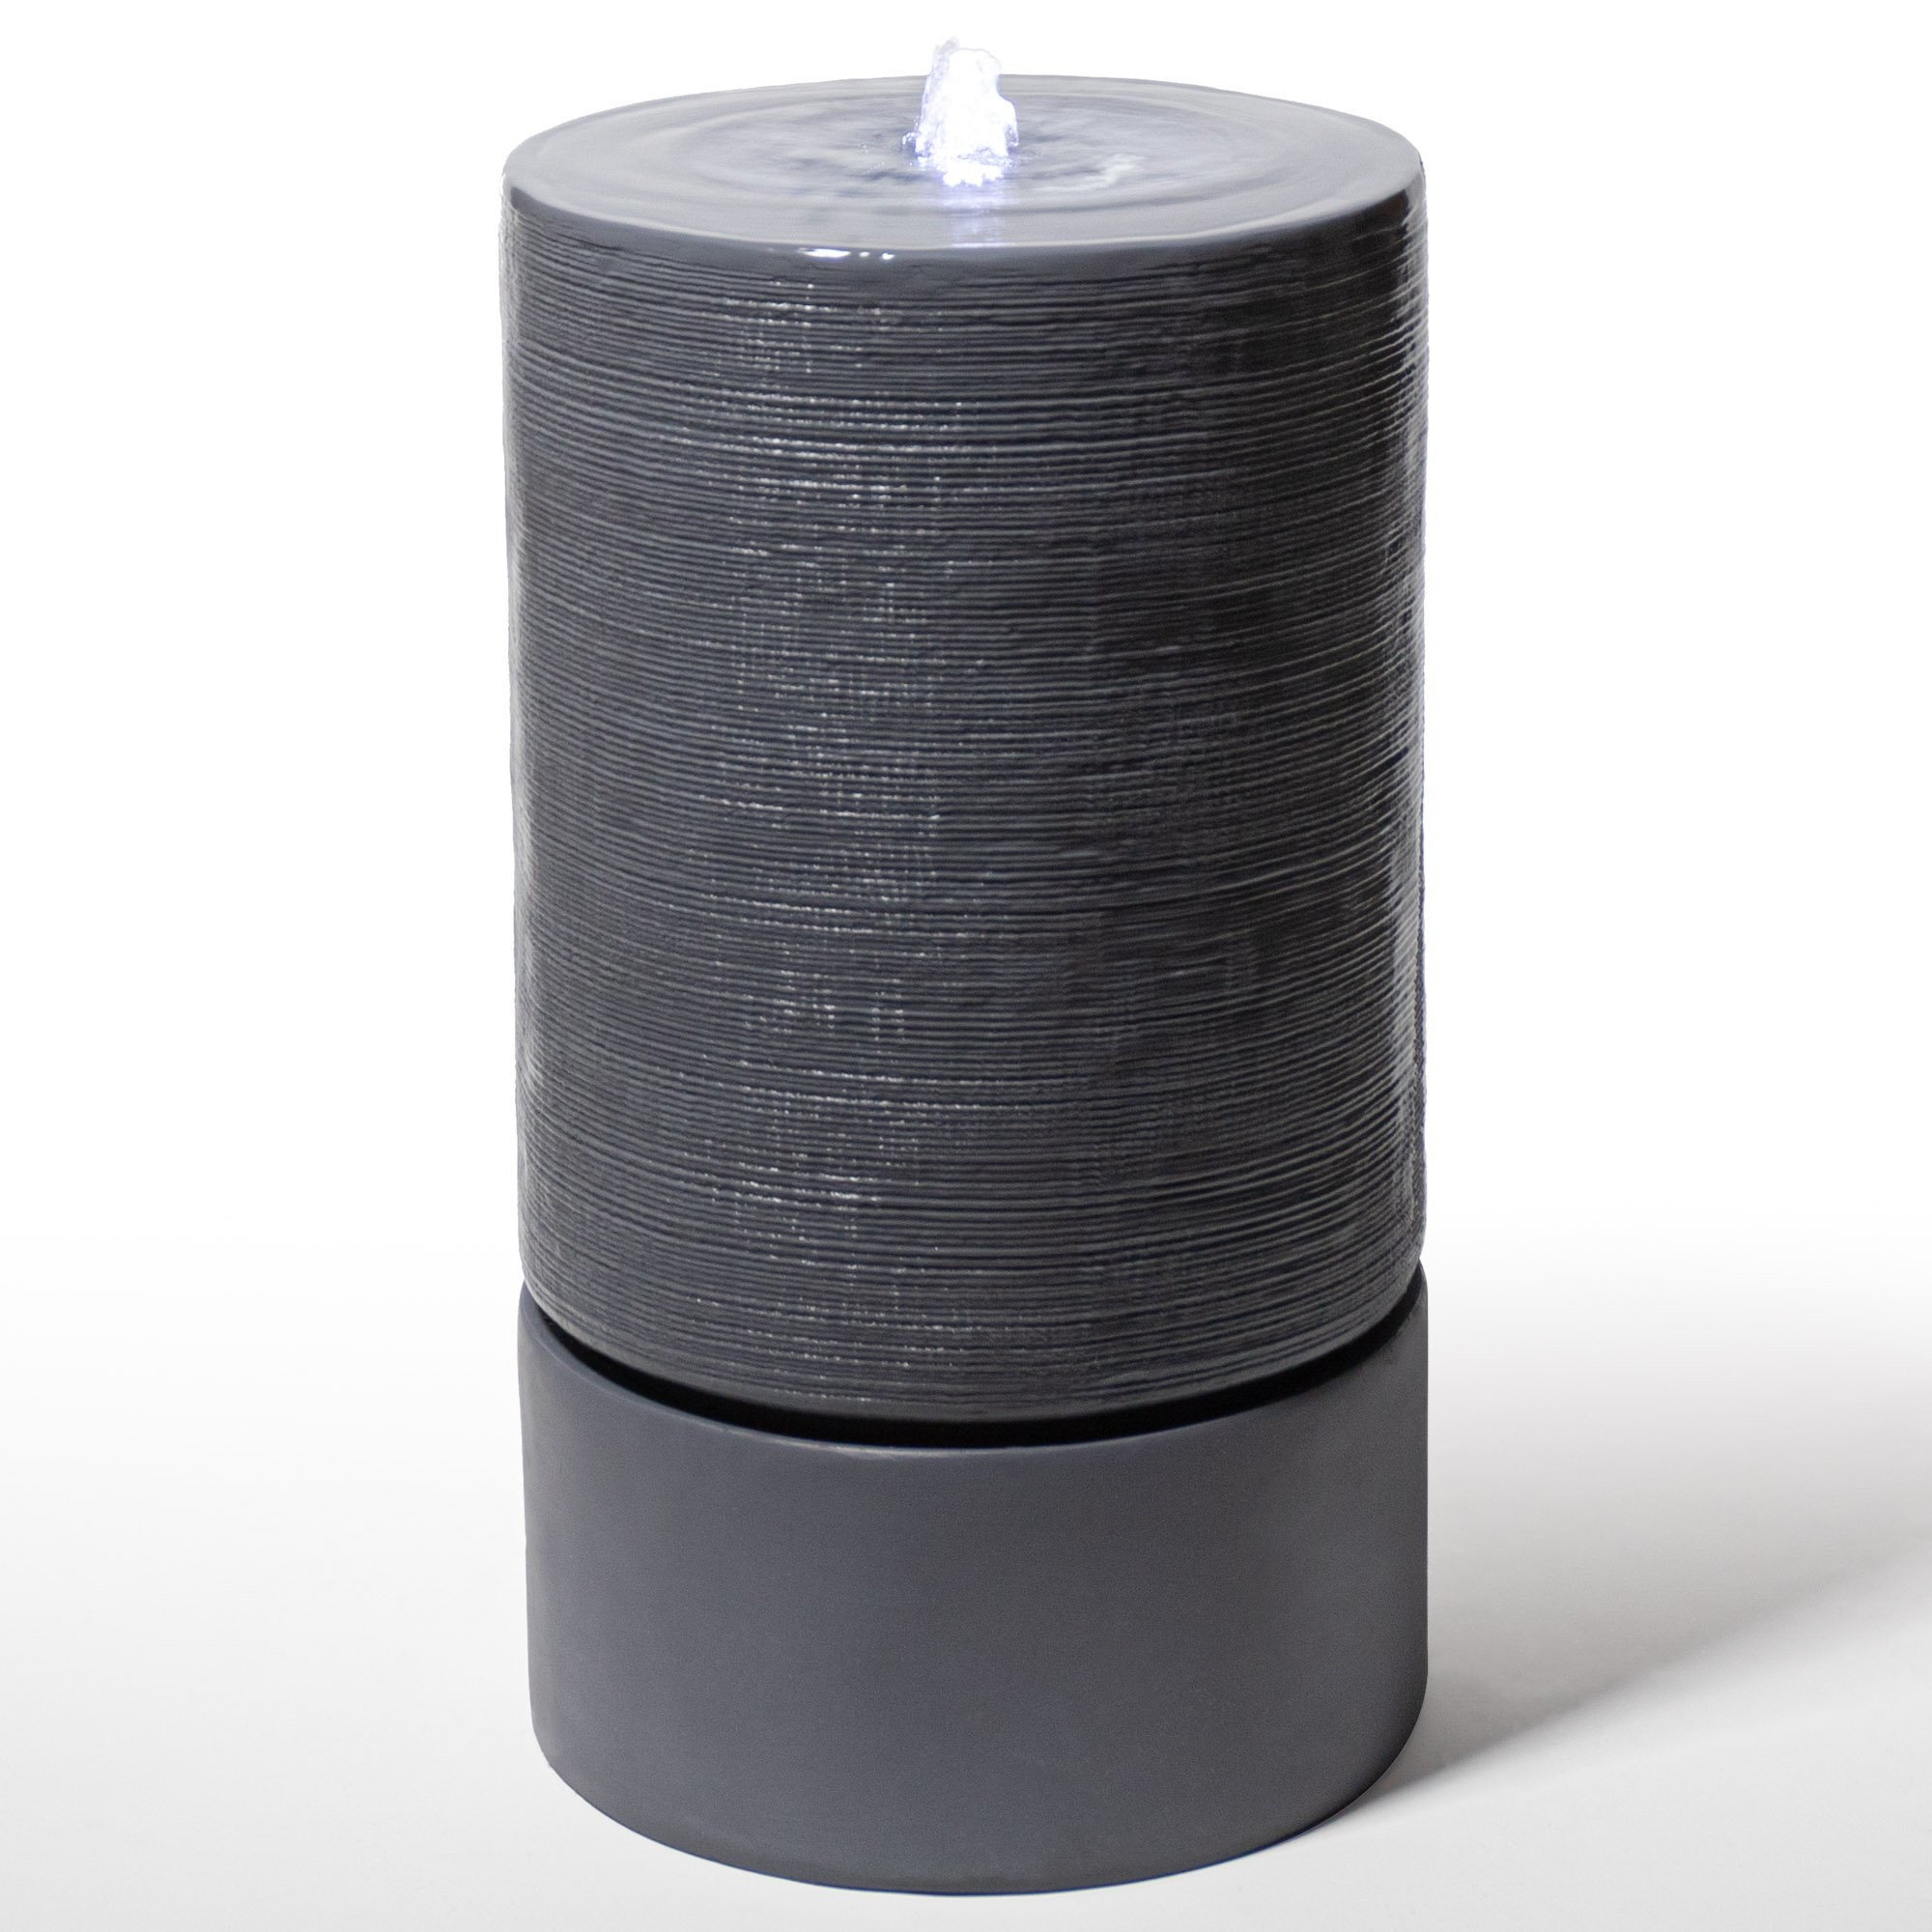 H85cm Siena Column Rippling Effect Water Feature with Lights - By Ambienté